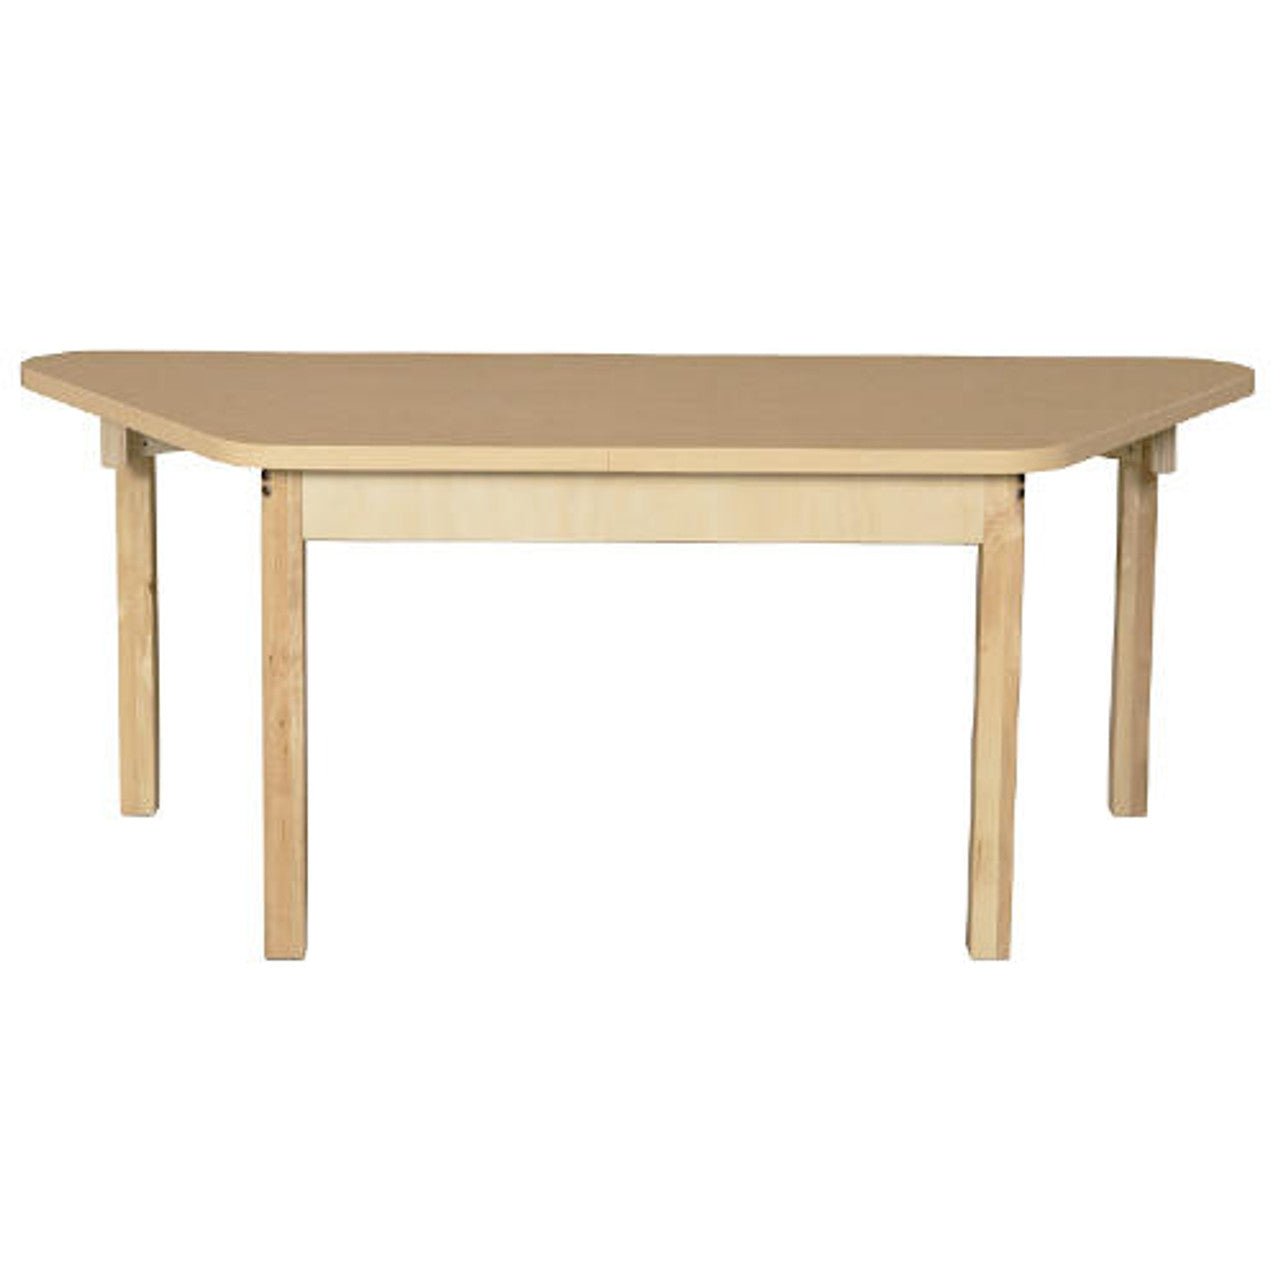 Trapezoidal High Pressure Laminate Table with Hardwood Legs- 22"